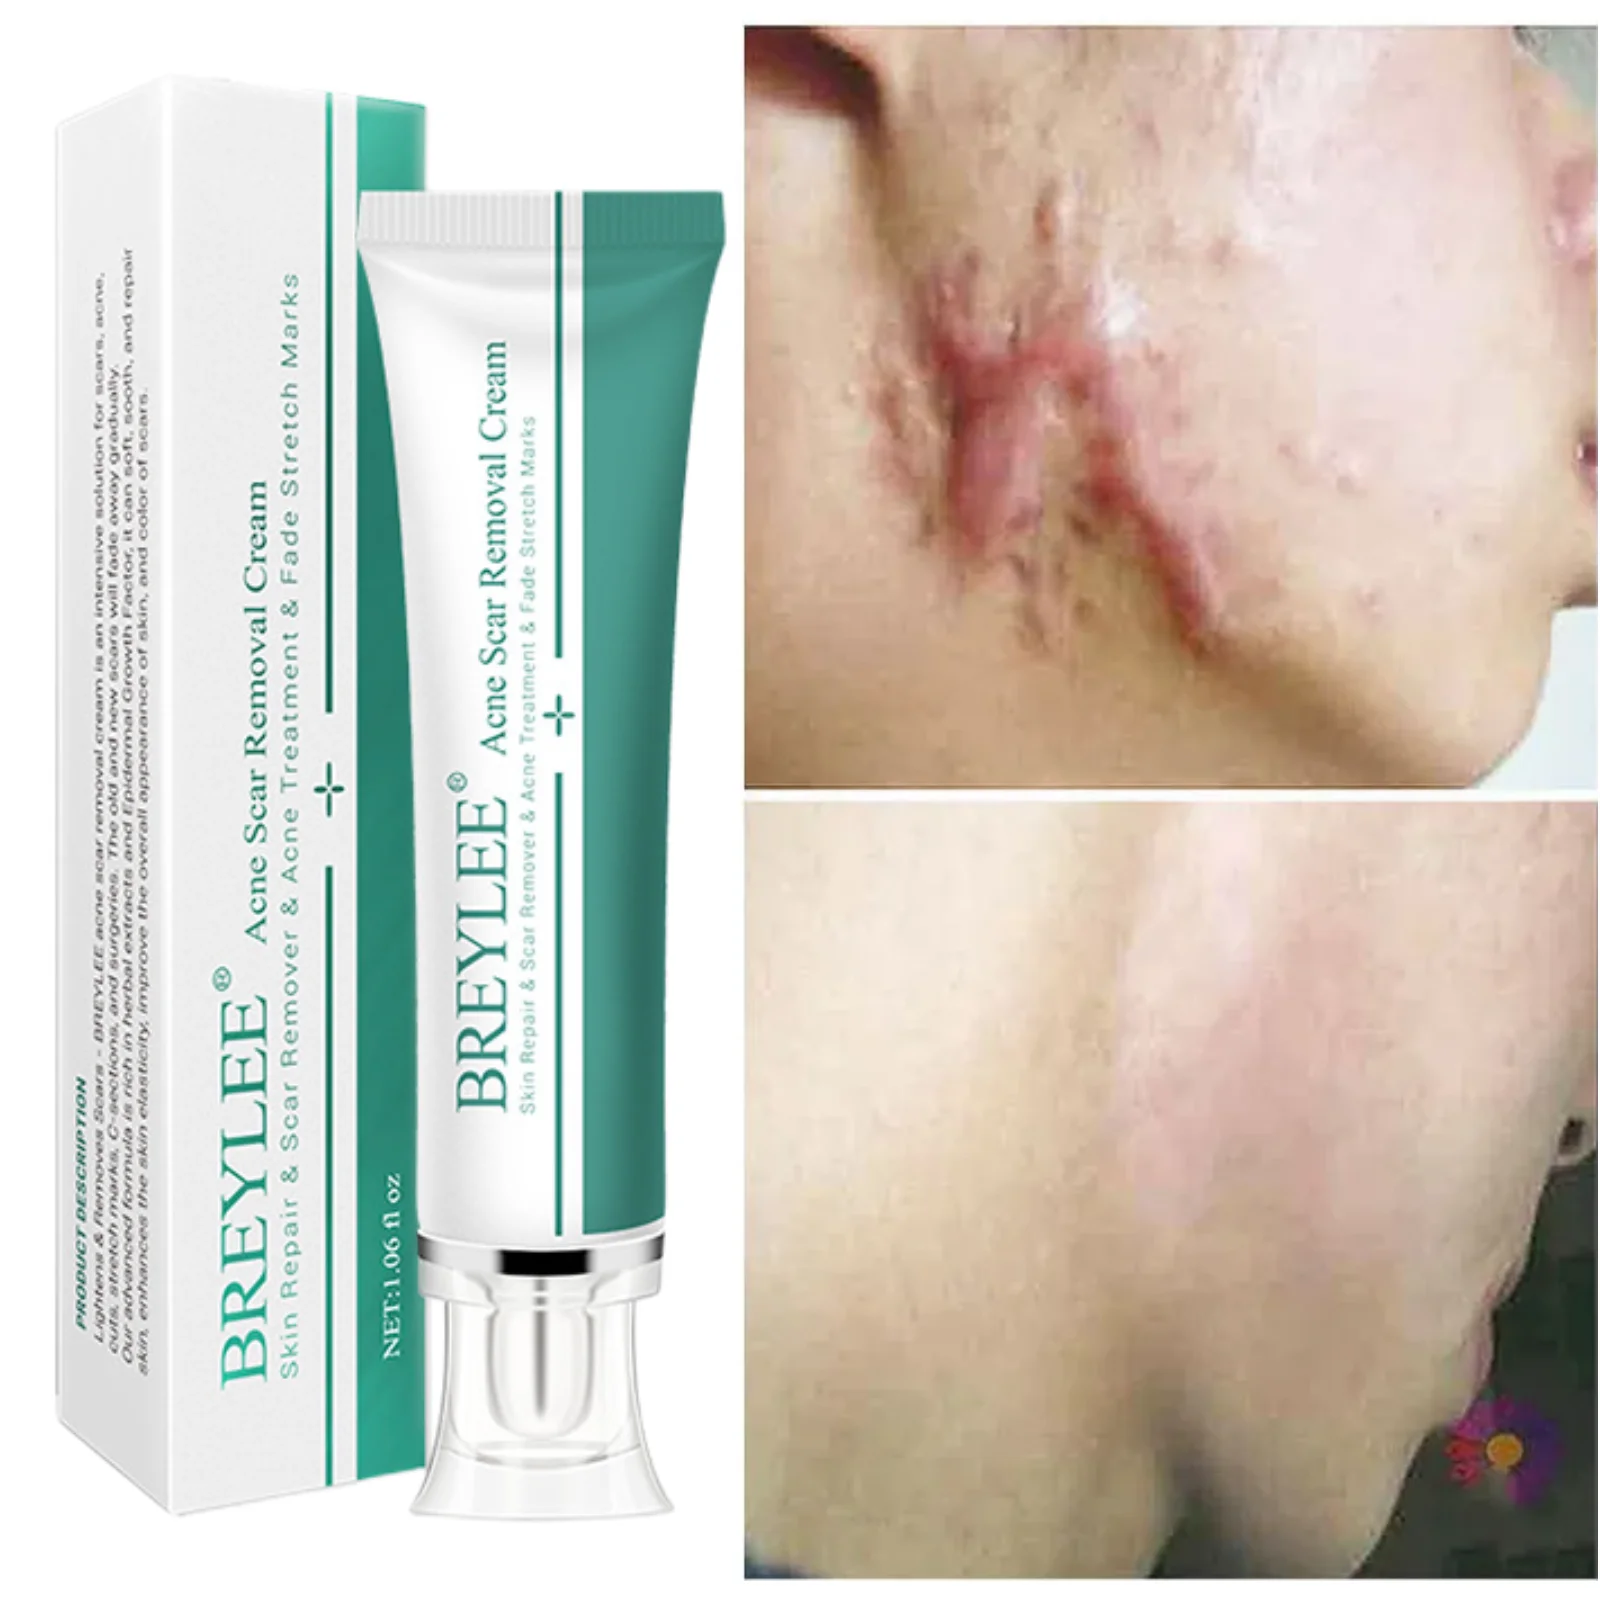 

Herbal Scar Removal Cream Gel Remove Acne Spots Fade Stretch Marks Burn Surgical Scars Repair Smoothing Whitening Body Skin Care